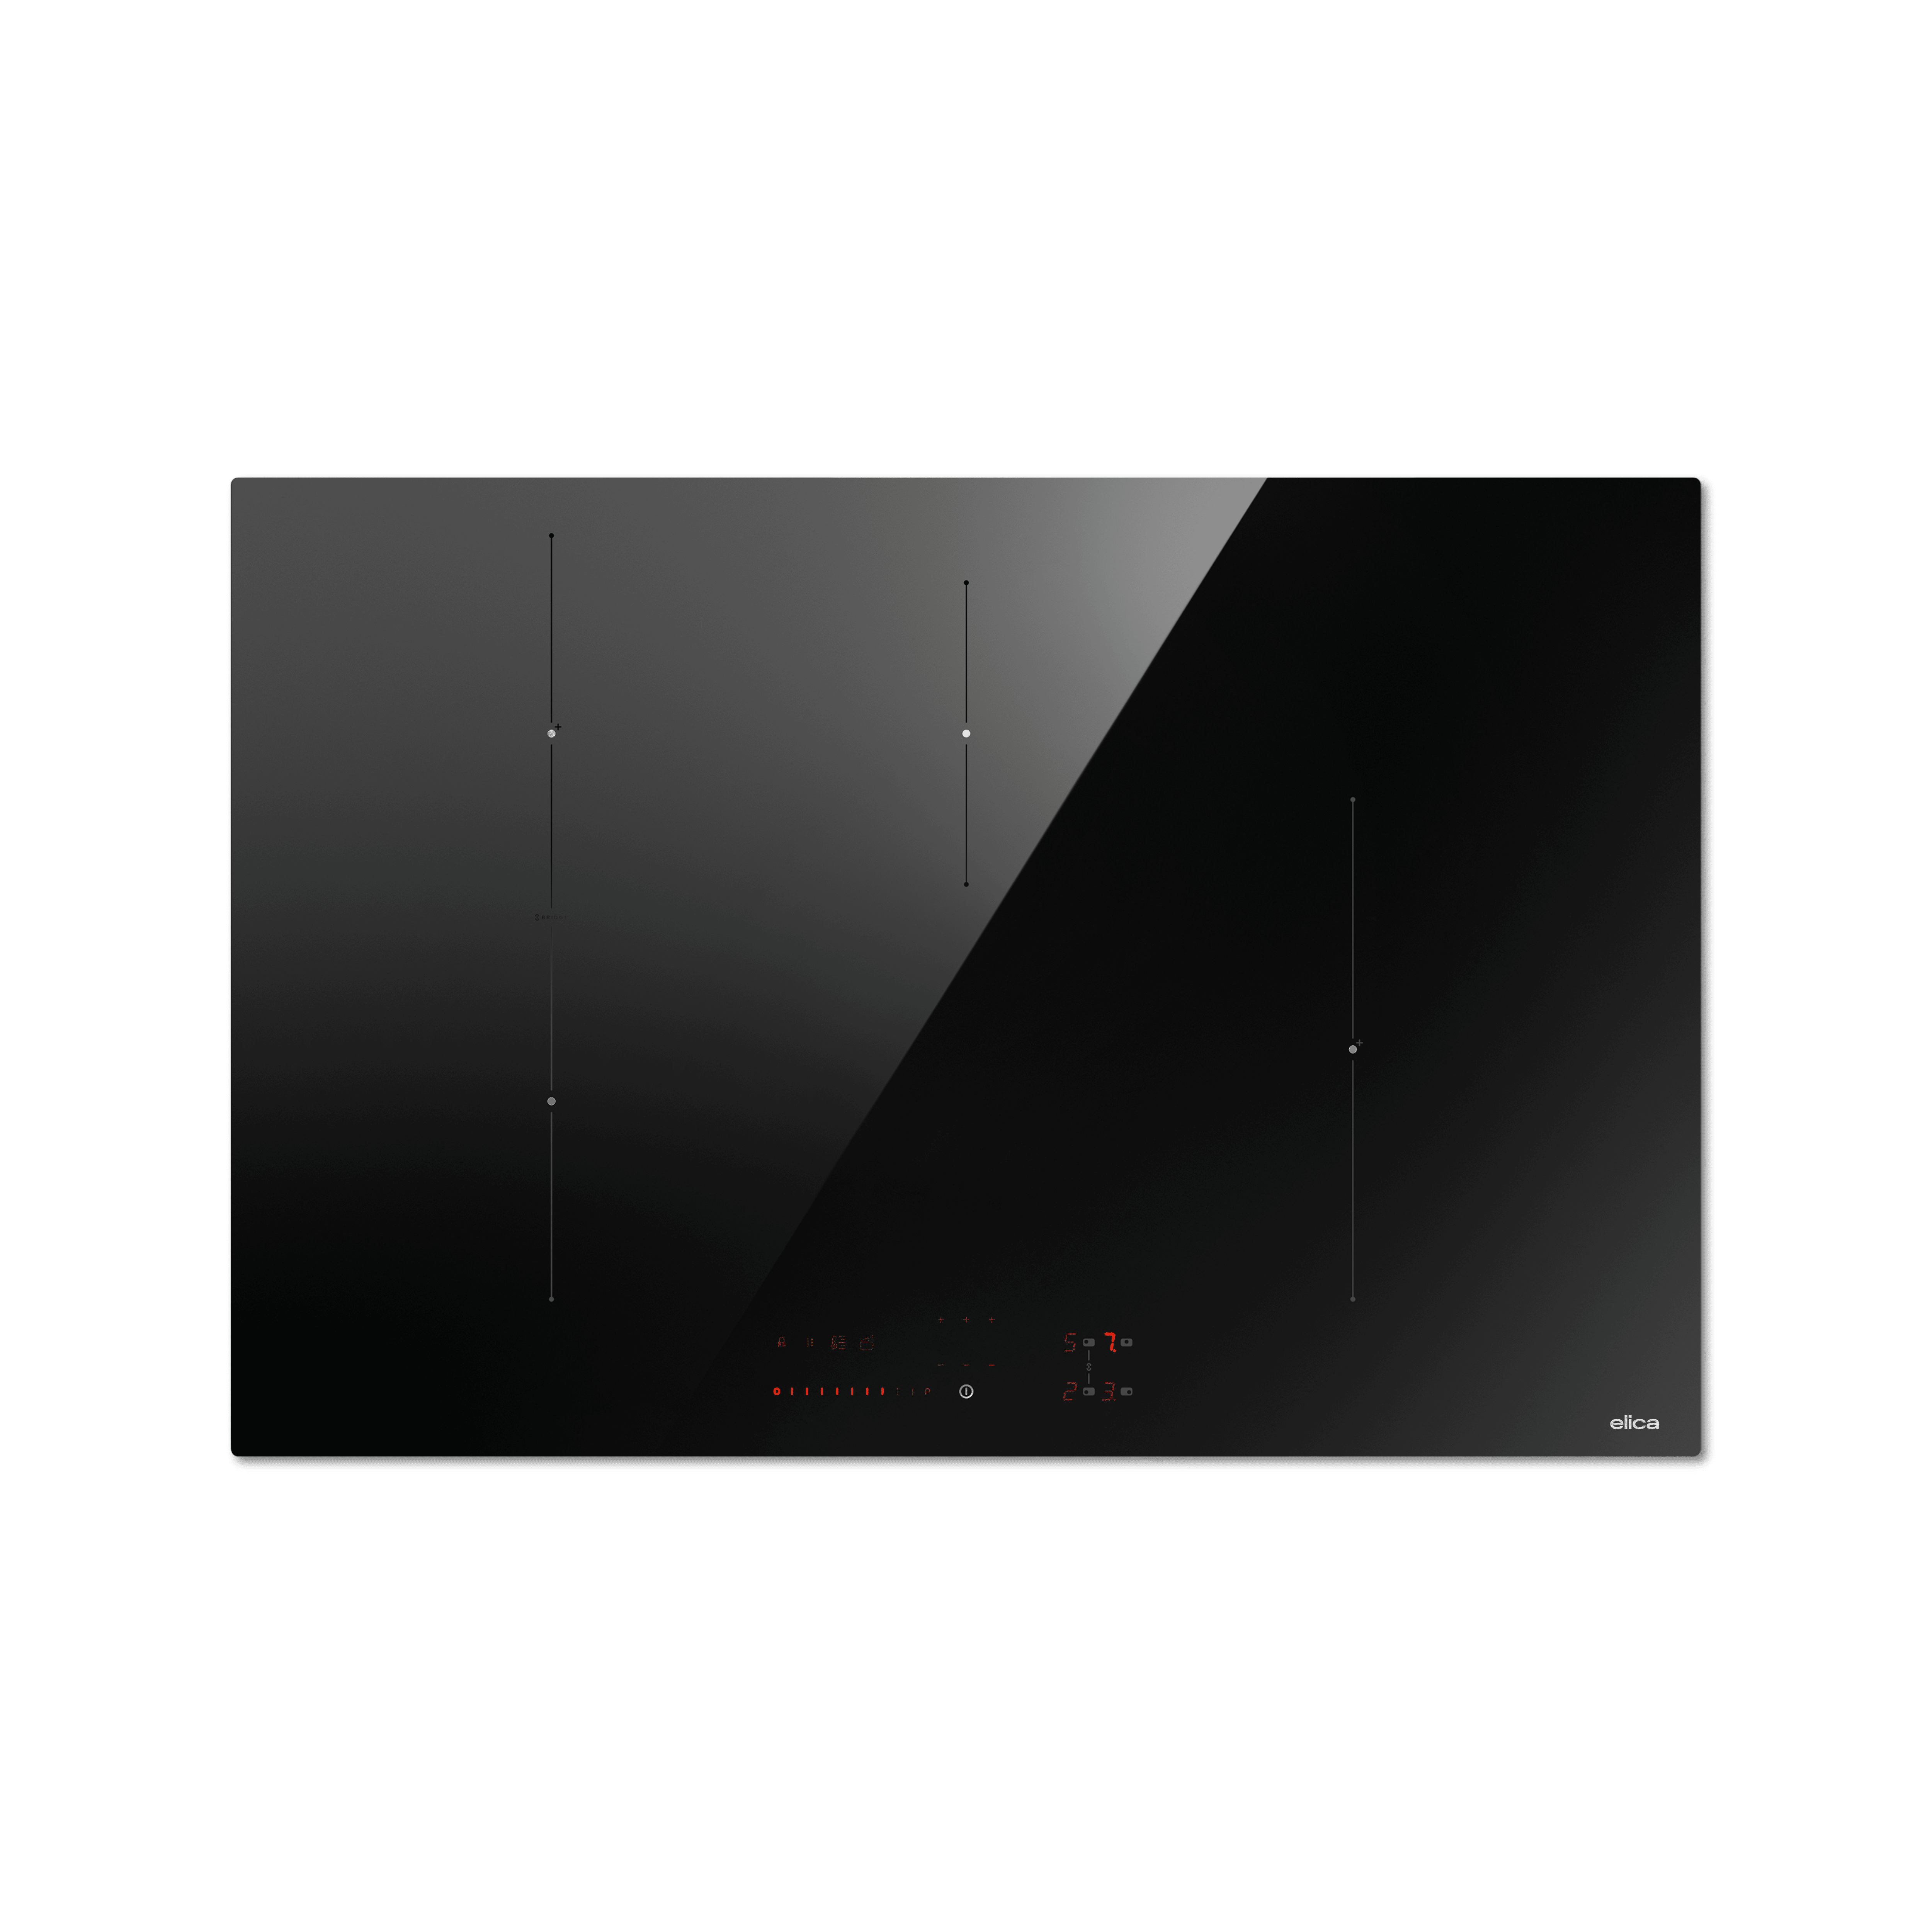 Hobs Induction Hobs RATIO 804 PLUS suggested